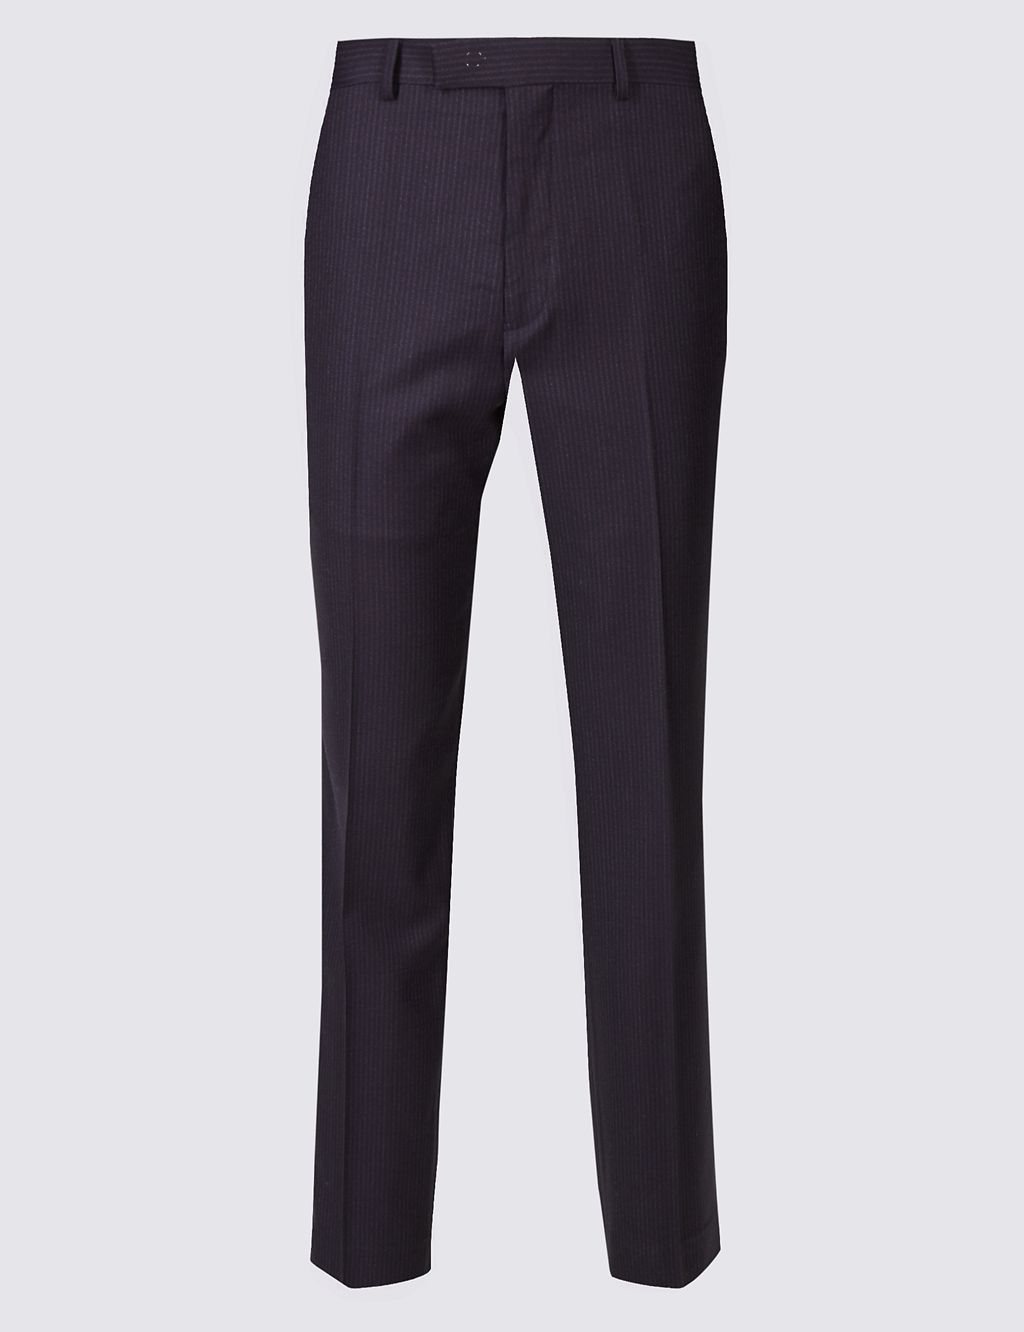 Navy Textured Tailored Fit Wool Trousers 1 of 5